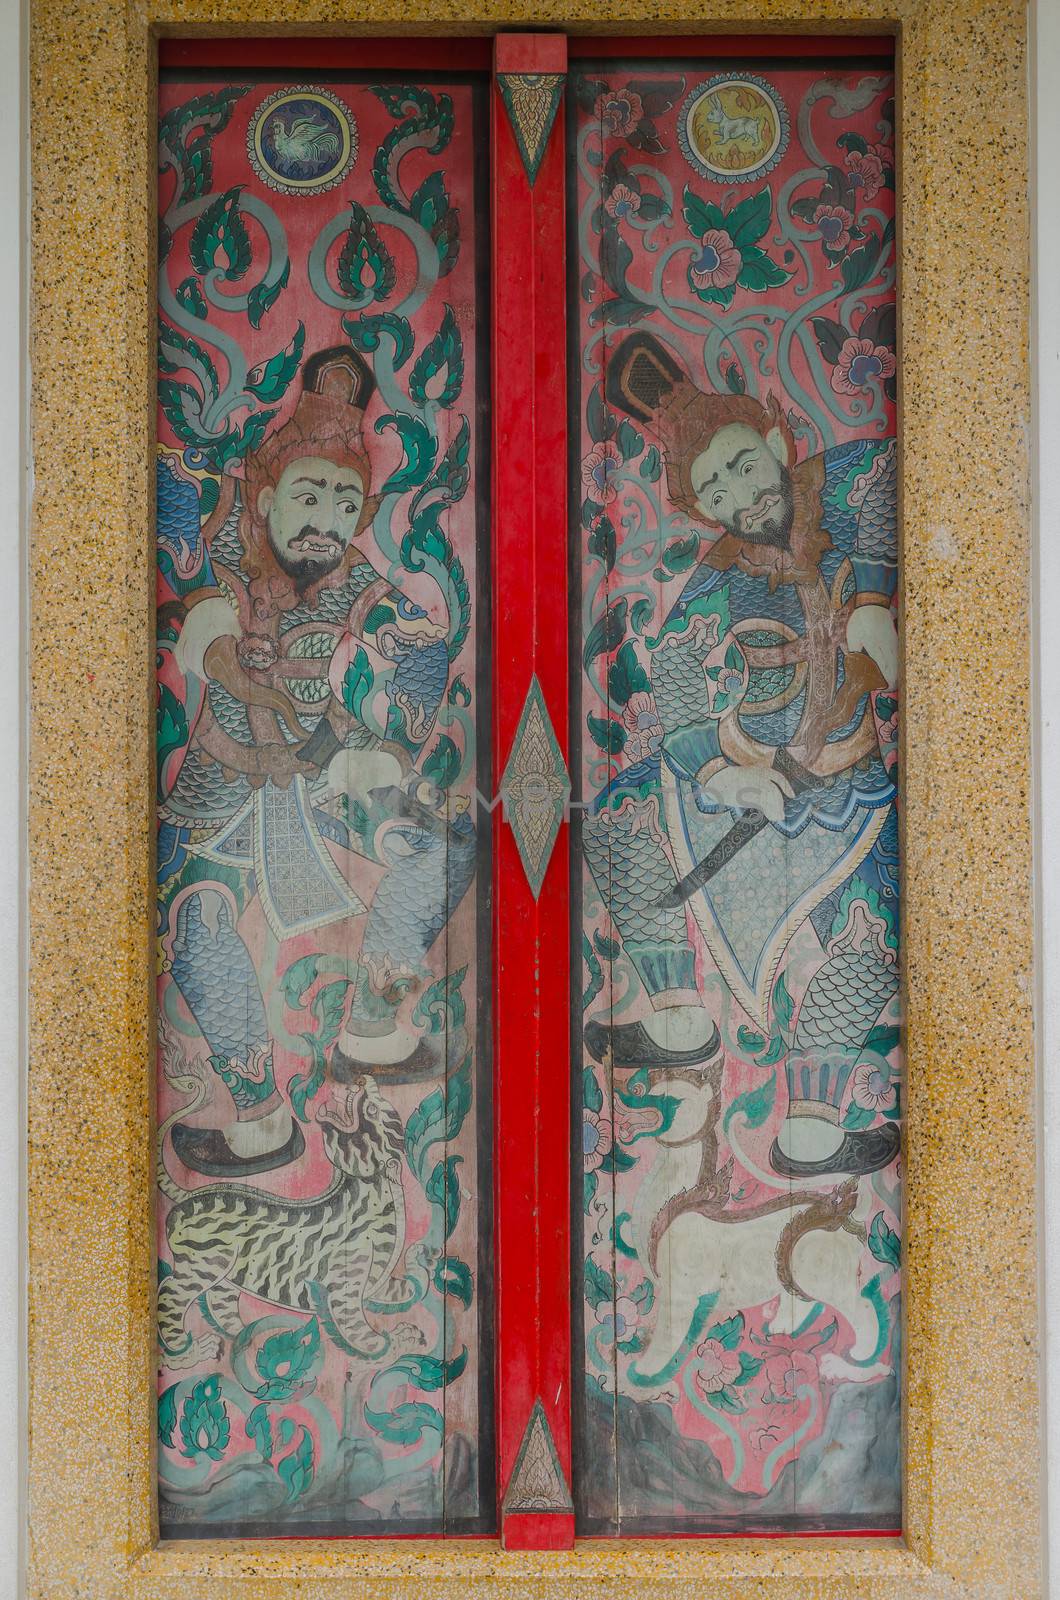 Thai and chinese art paint mural on multi colors door in thai temple at Chonburi Thailand